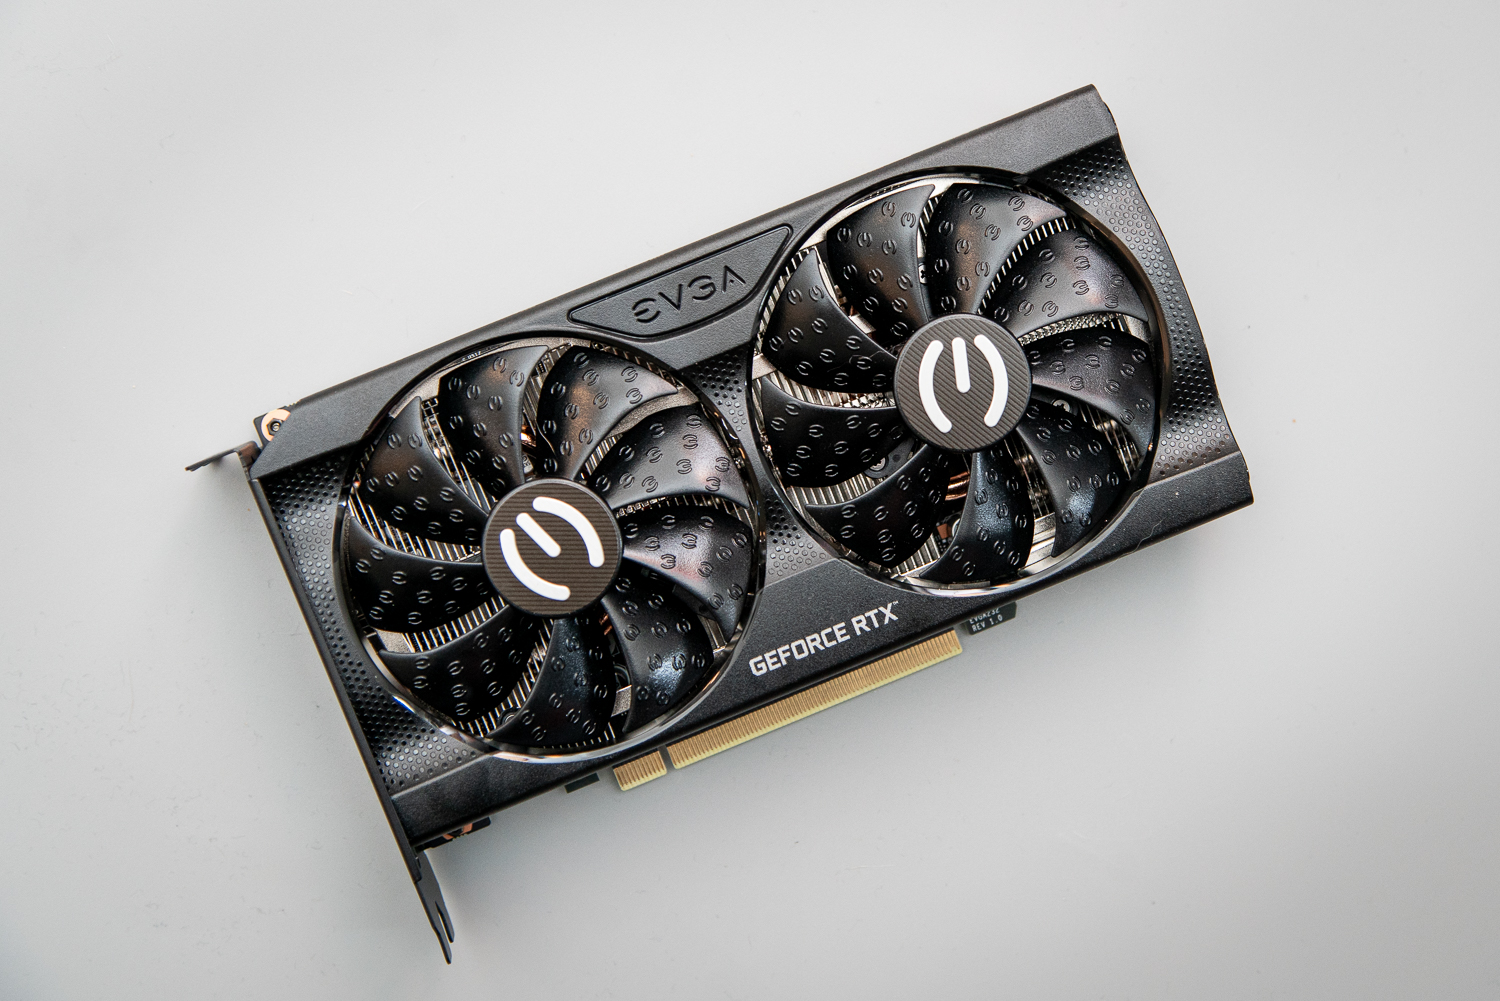 Nvidia RTX 3050 review: For an overpriced 1080p GPU, this could've been  worse